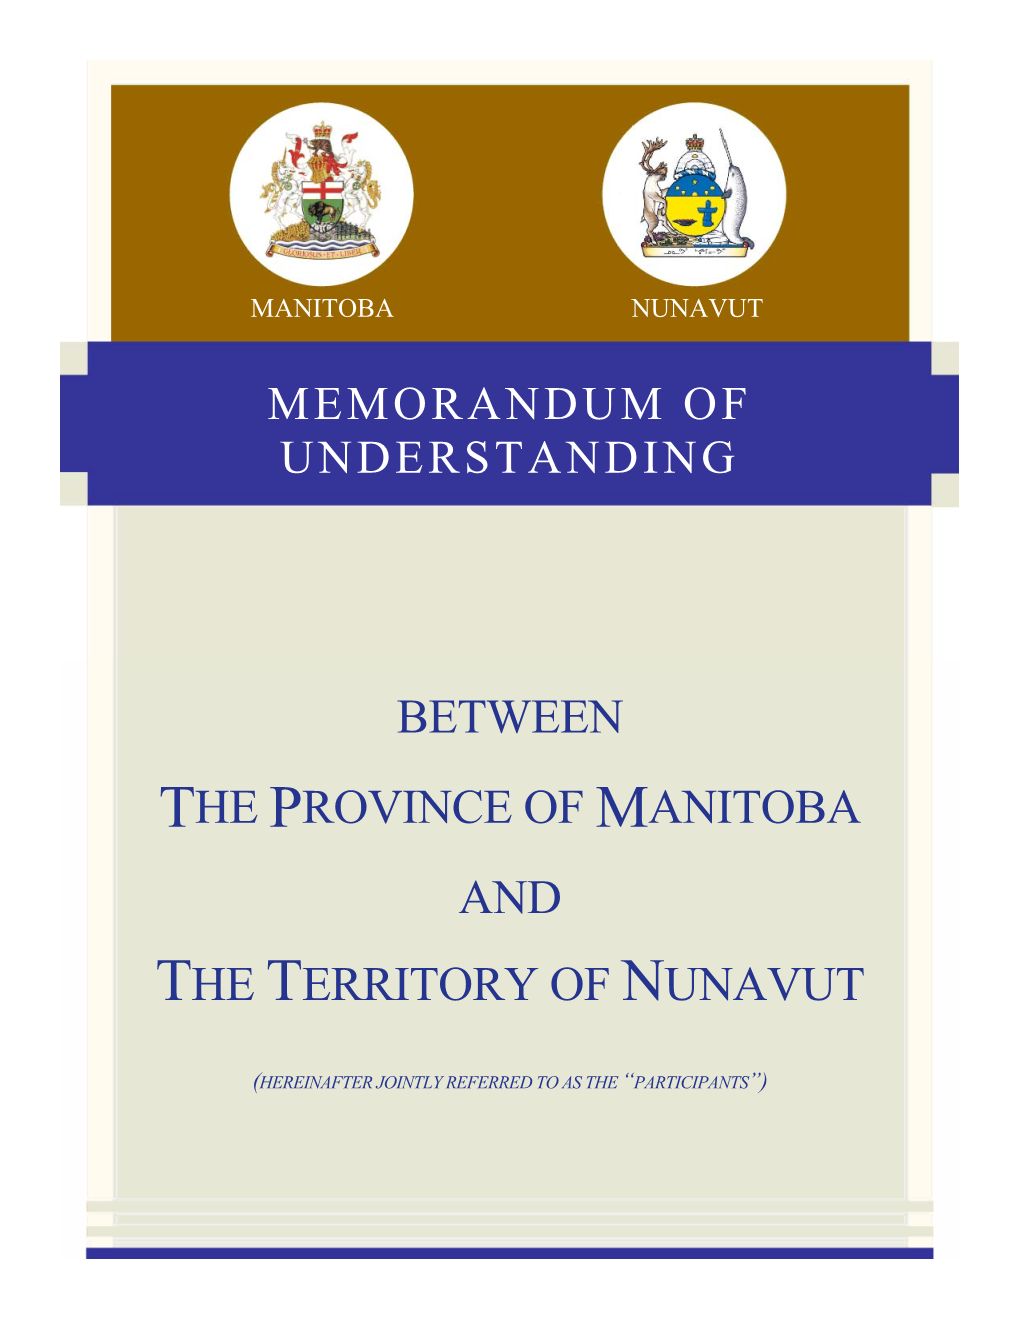 Between the Province of Manitoba and the Territory of Nunavut